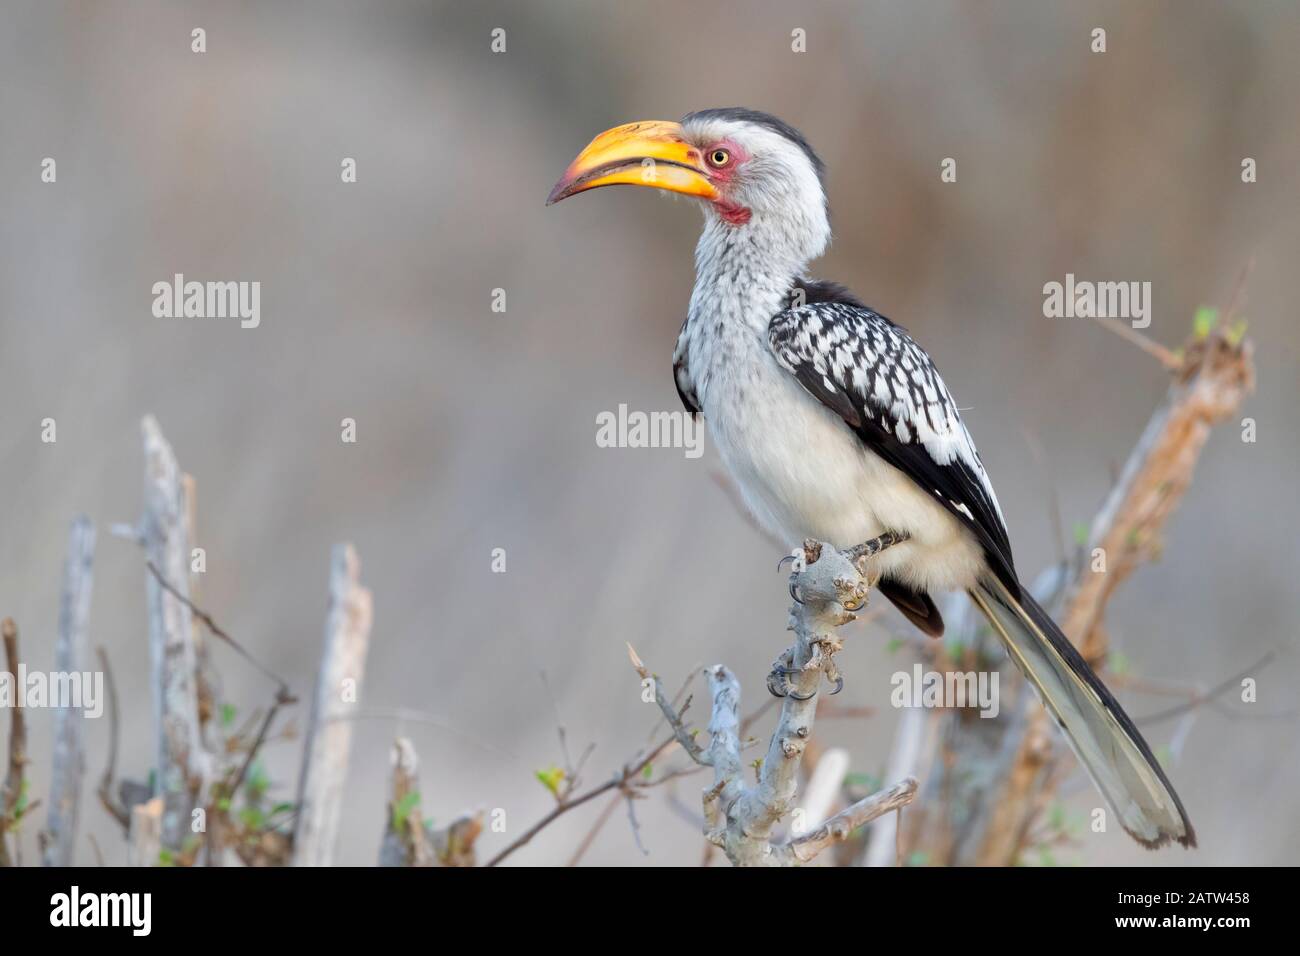 Southern Yellow-billed Hornbill (Lamprotornis leucomelas), side view of an adult perched on a branch, Mpumalanga, South Africa Stock Photo